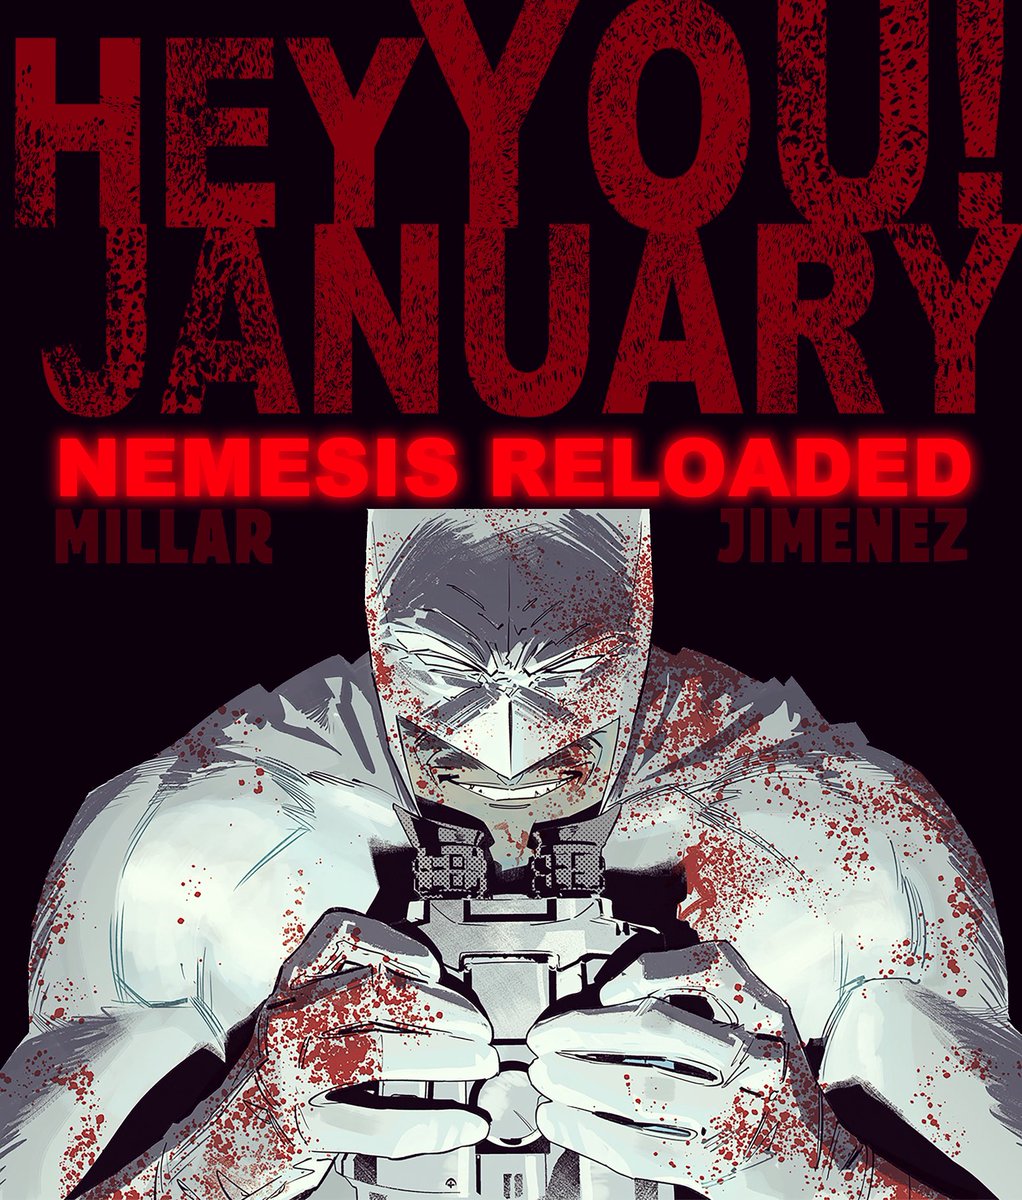 Have a good week, FRIENDS!! And see you next January with #nemesisreloaded #1🔥🔥🔥🔥 ⁦@mrmarkmillar⁩ script ⁦@giovanna_niro⁩ colors #nemesis